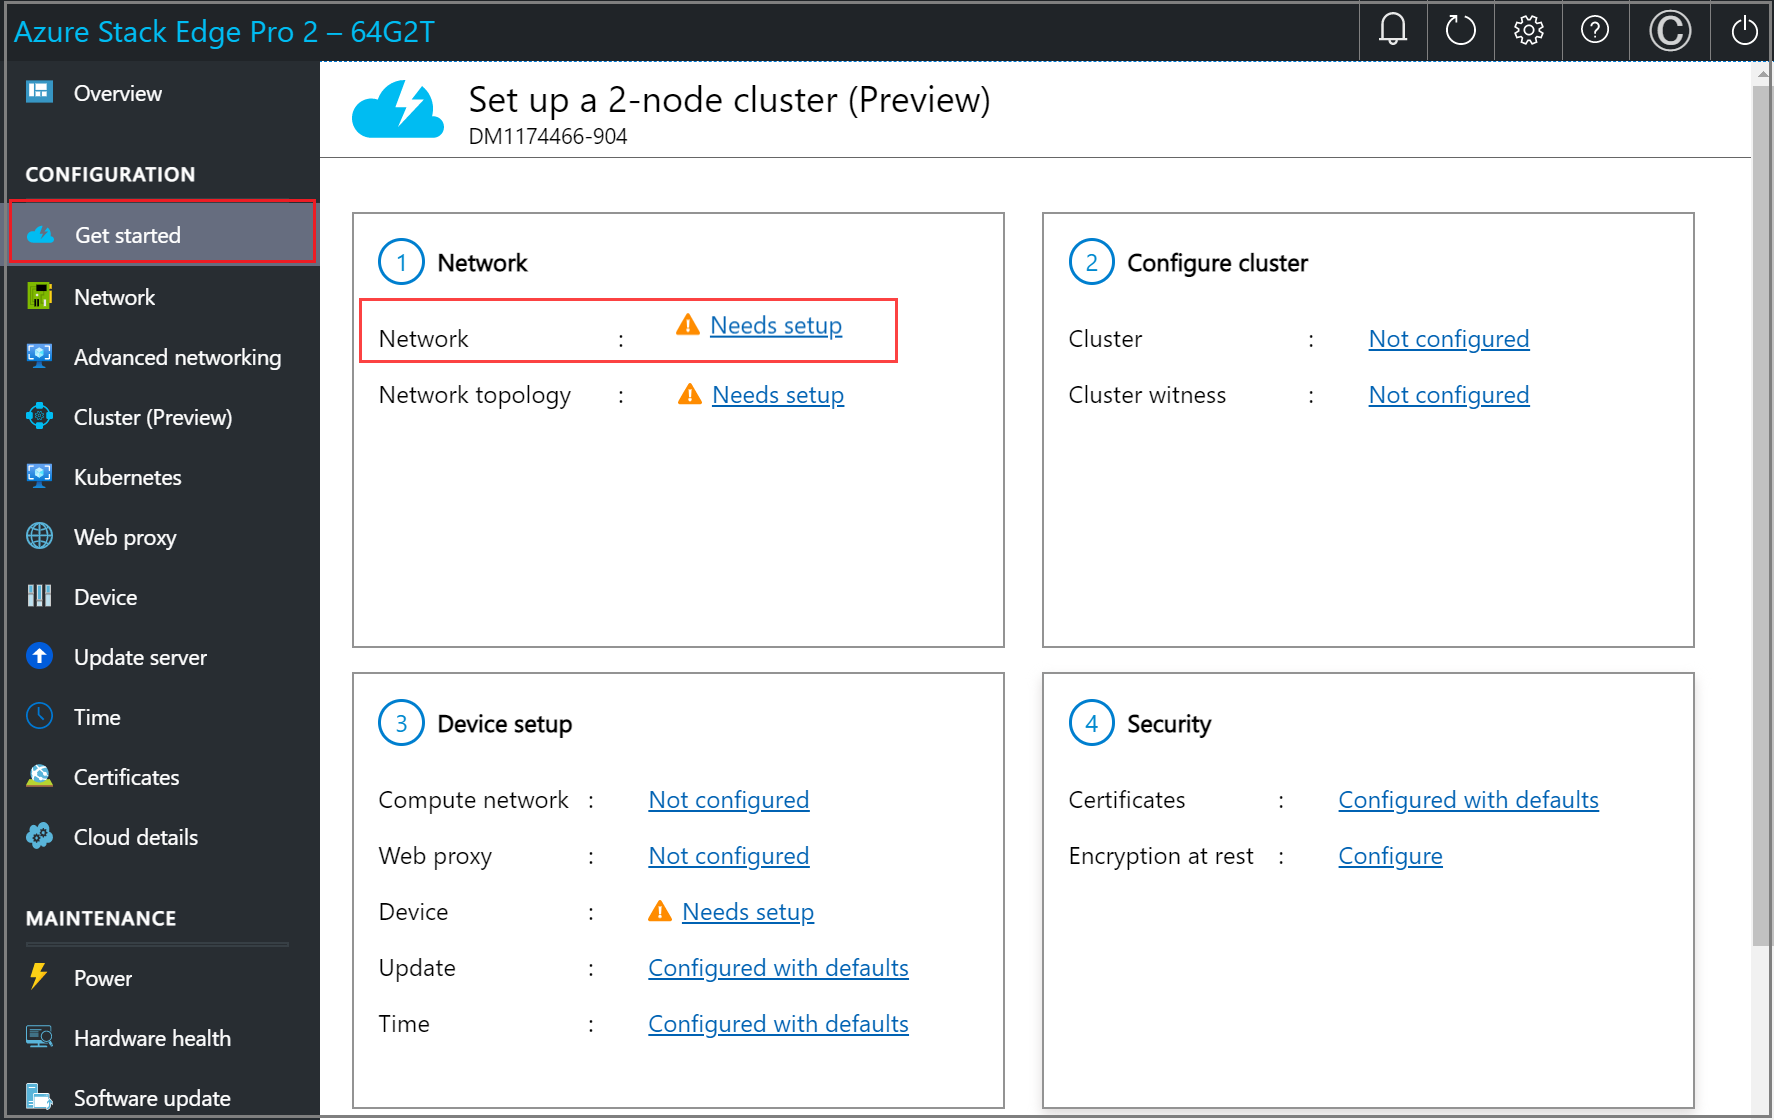 Screenshot of the Get started page in the local web UI of an Azure Stack Edge device. The Needs setup is highlighted on the Network tile.